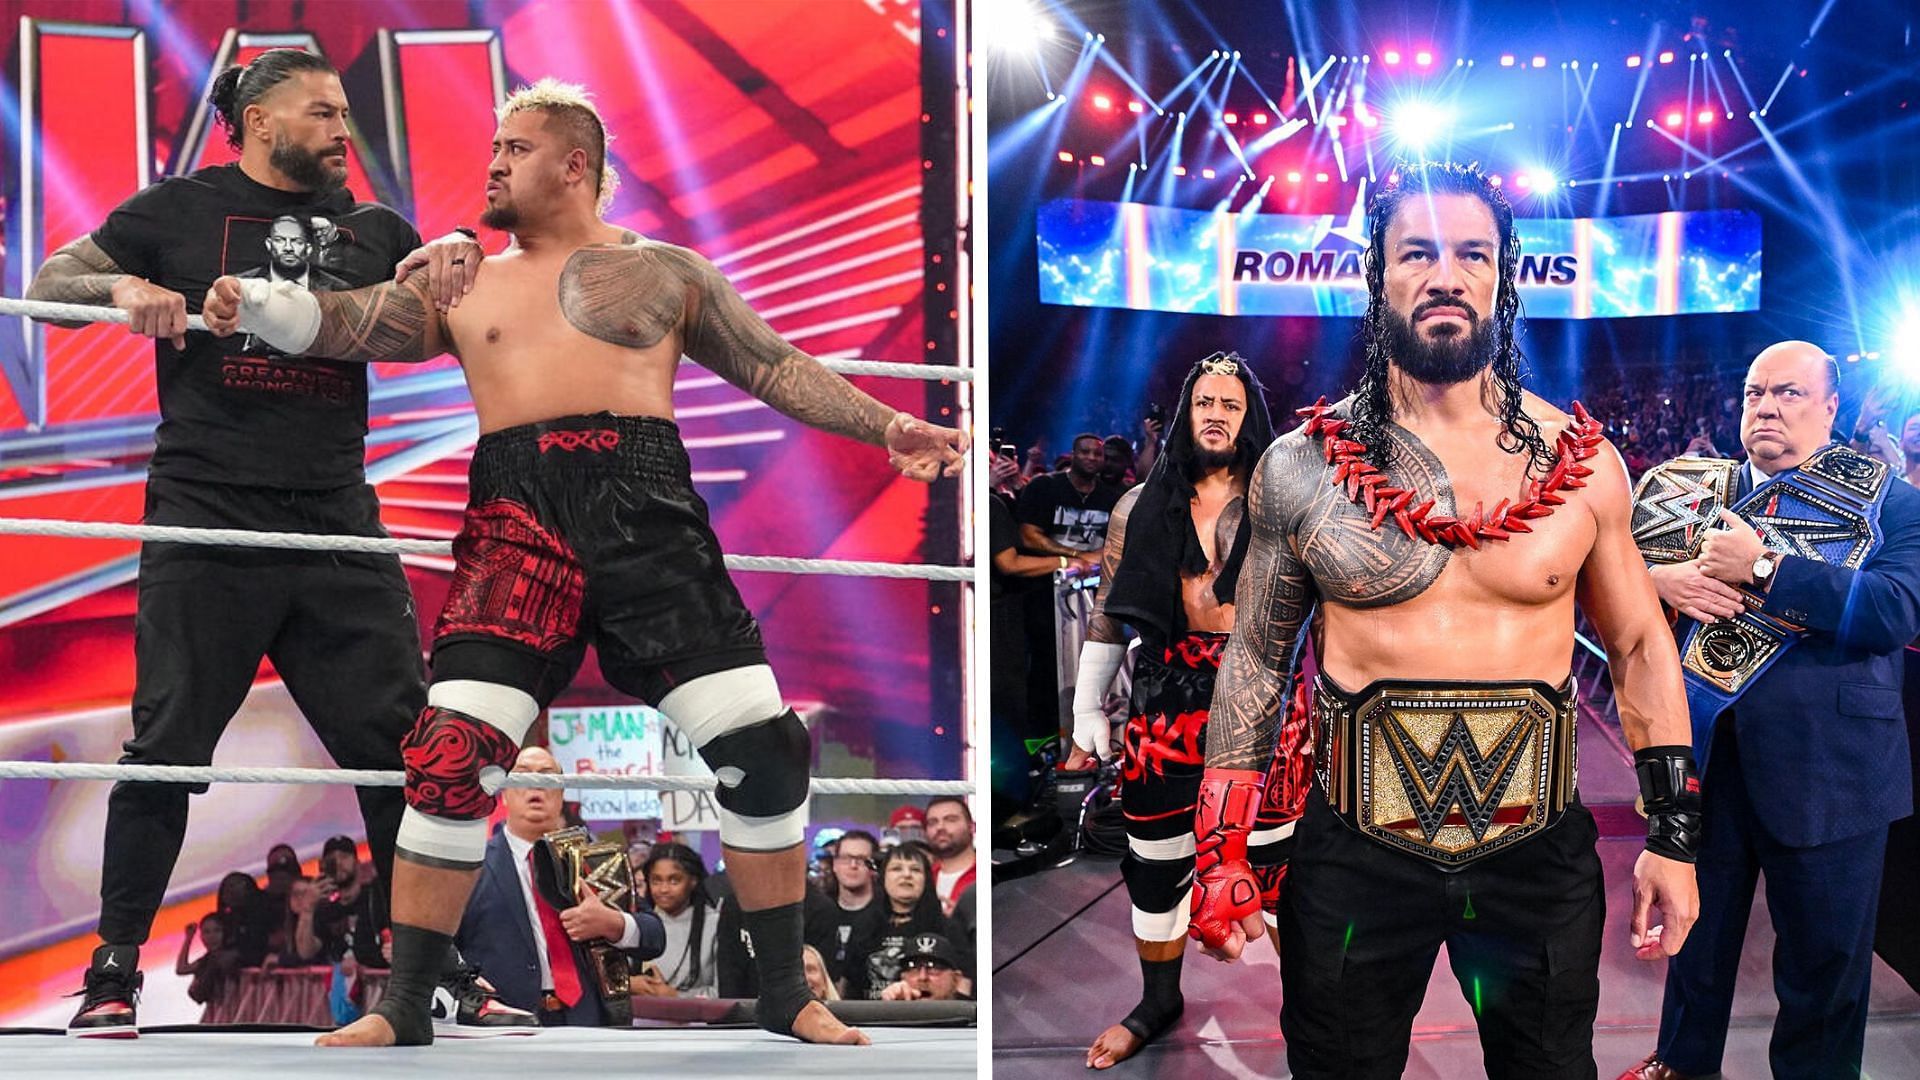 The Bloodline now has an interesting power dynamic between Roman Reigns and Solo Sikoa